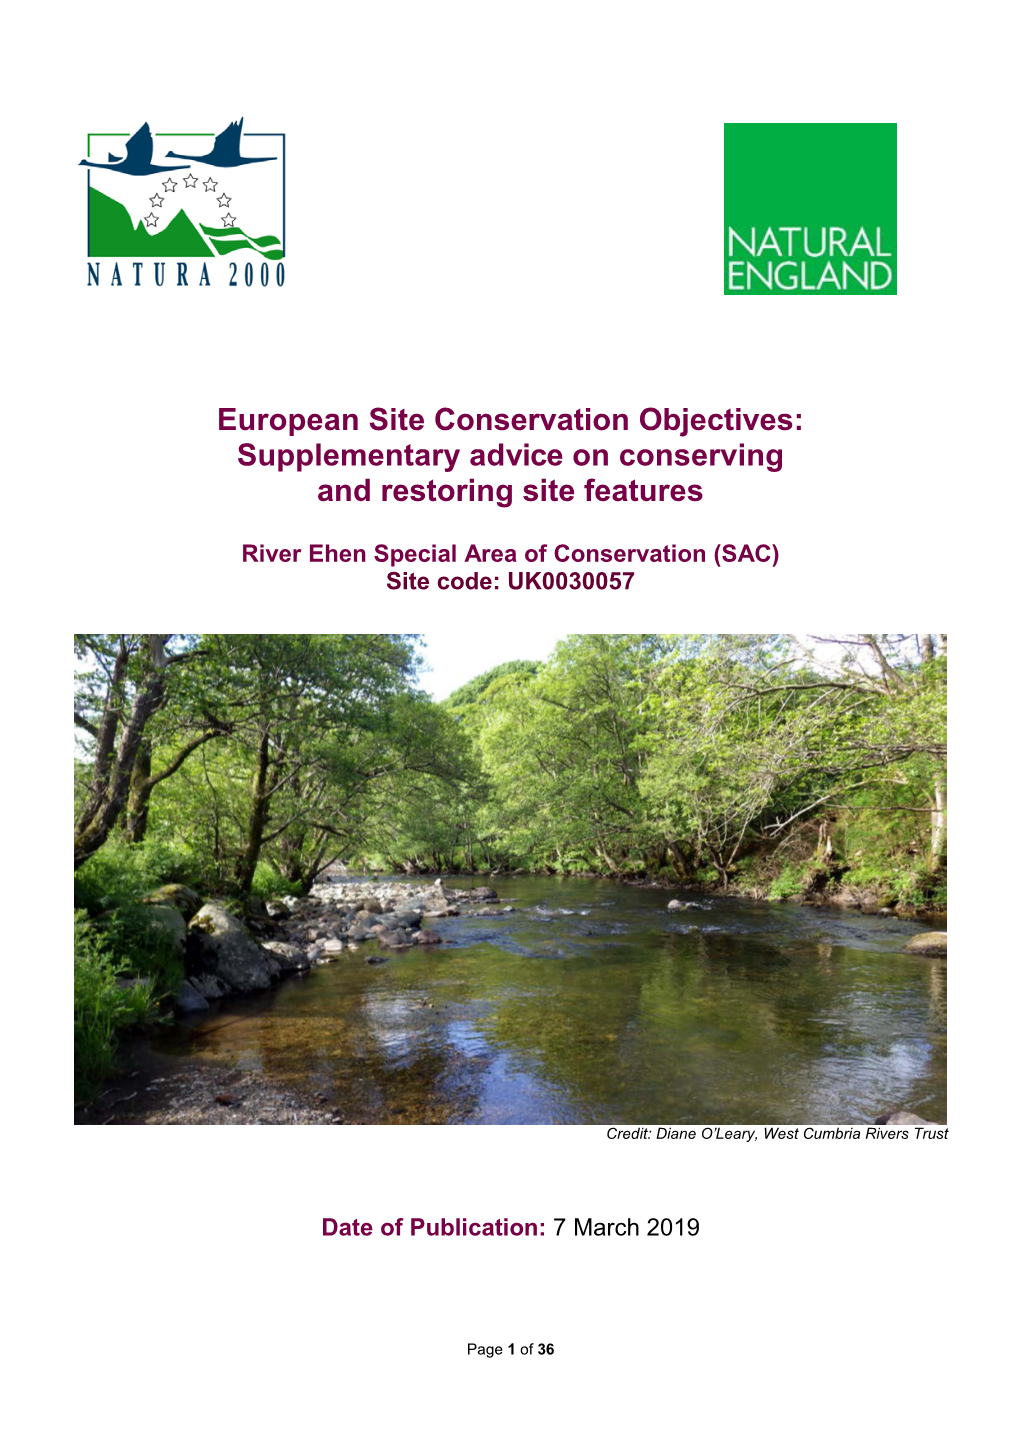 River Ehen SAC Conservation Objectives Supplementary Advice